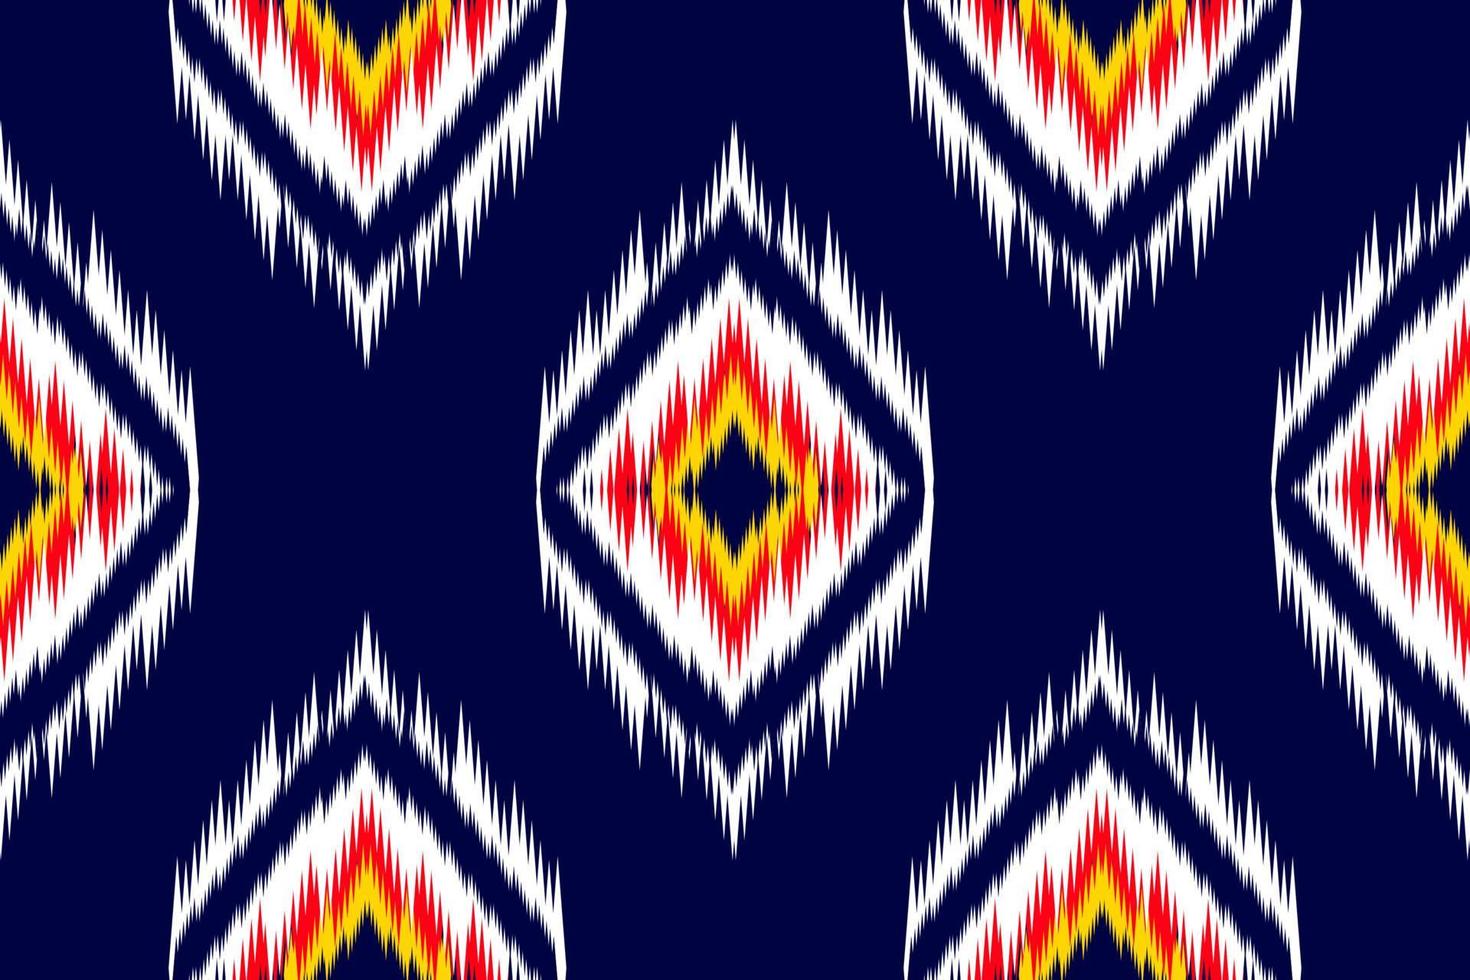 Ikat seamless pattern in tribal. Fabric ethnic pattern art. American, Mexican style. Design for background, wallpaper, vector illustration, fabric, clothing, carpet, textile, batik, embroidery.